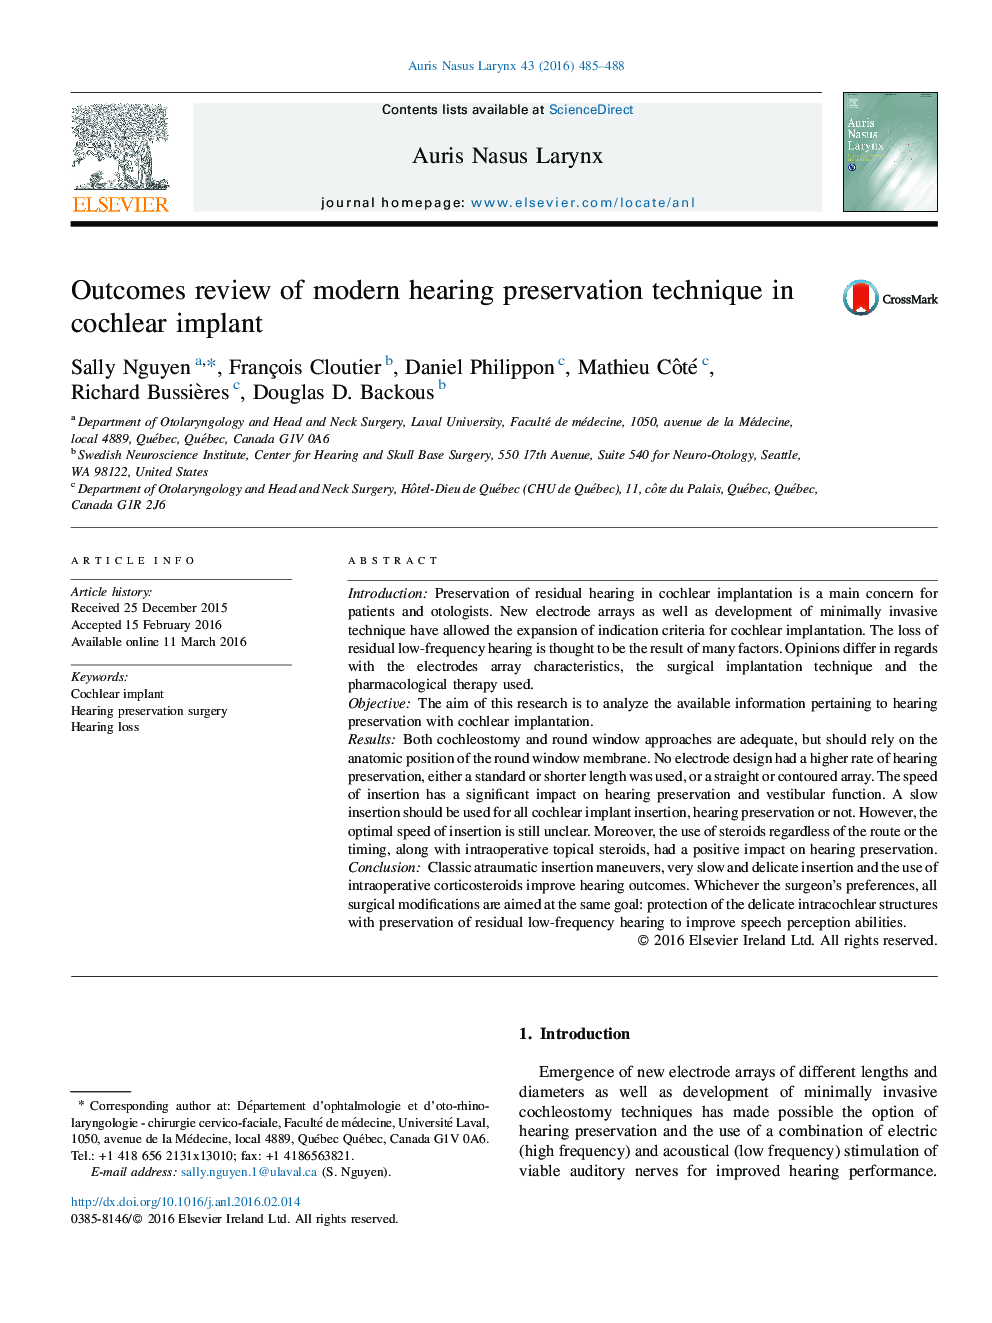 Outcomes review of modern hearing preservation technique in cochlear implant